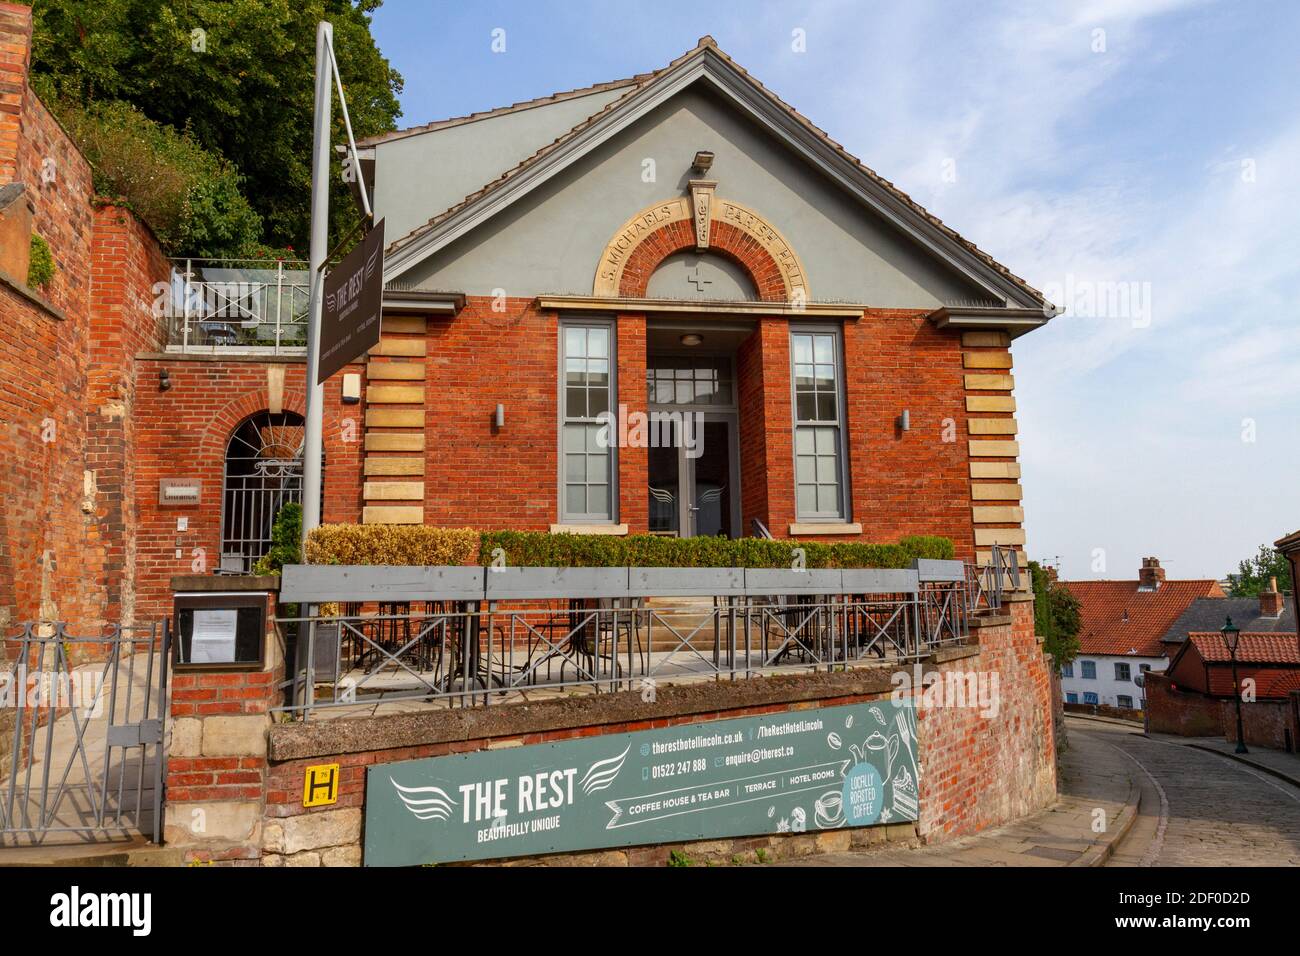 The Rest Hotel at St Michael's (Reader's Rest), St Michaels Parish Hall, Steep Hill, Lincoln, Lincolnshire, Großbritannien. Stockfoto